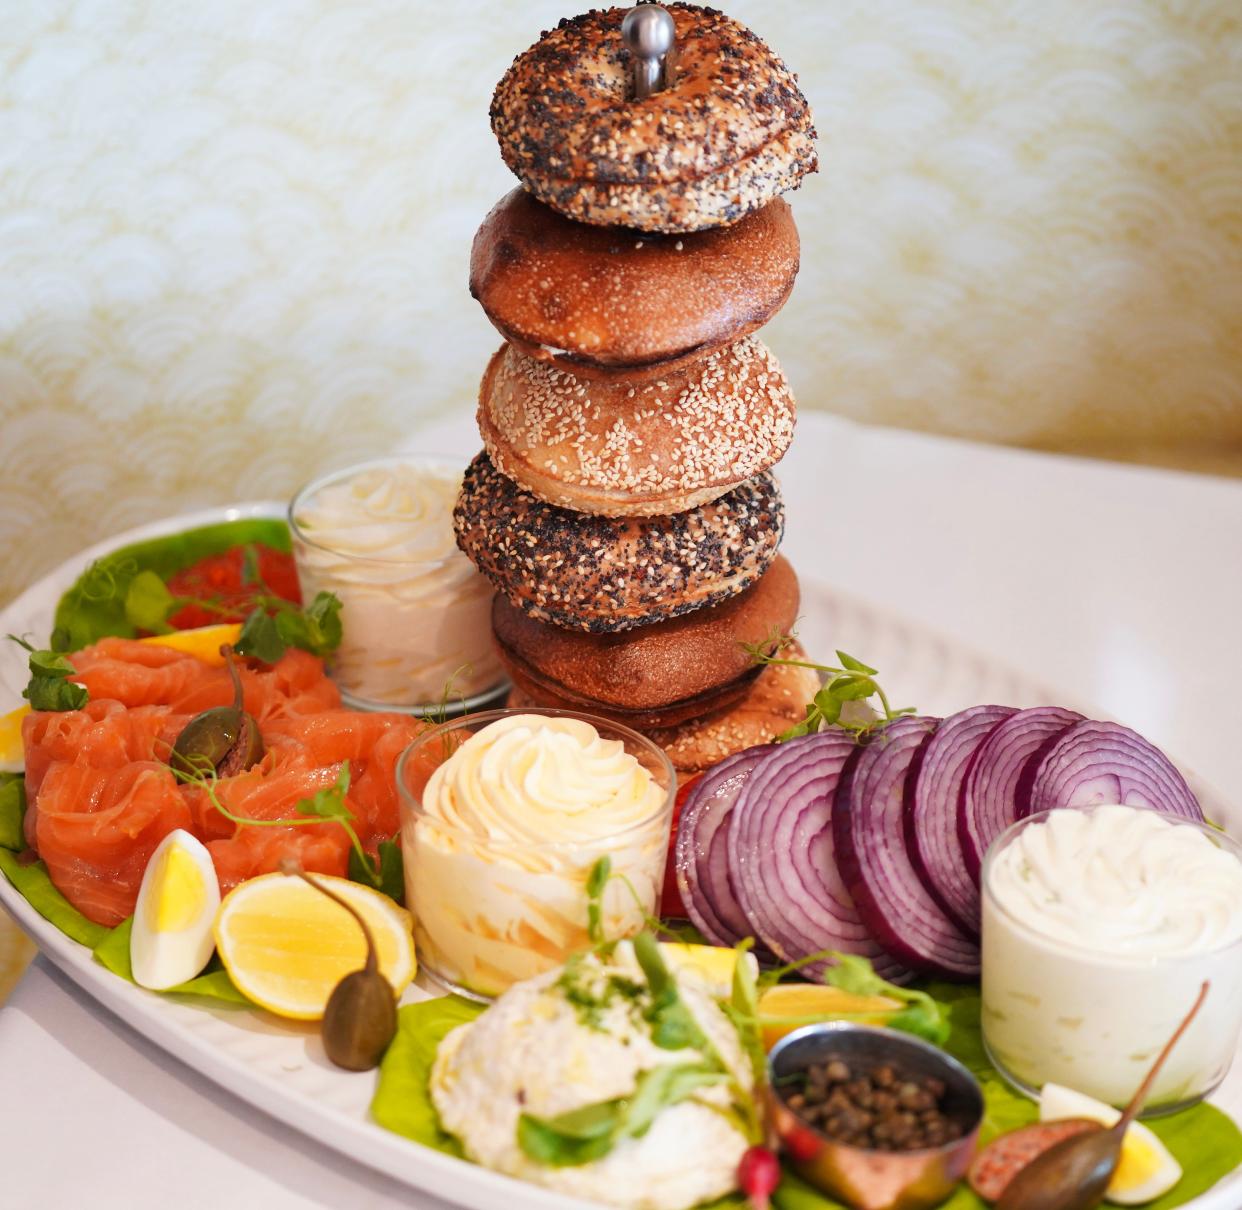 Saturday brunch at Swifty's at The Colony includes a Popup Bagels “tower”.